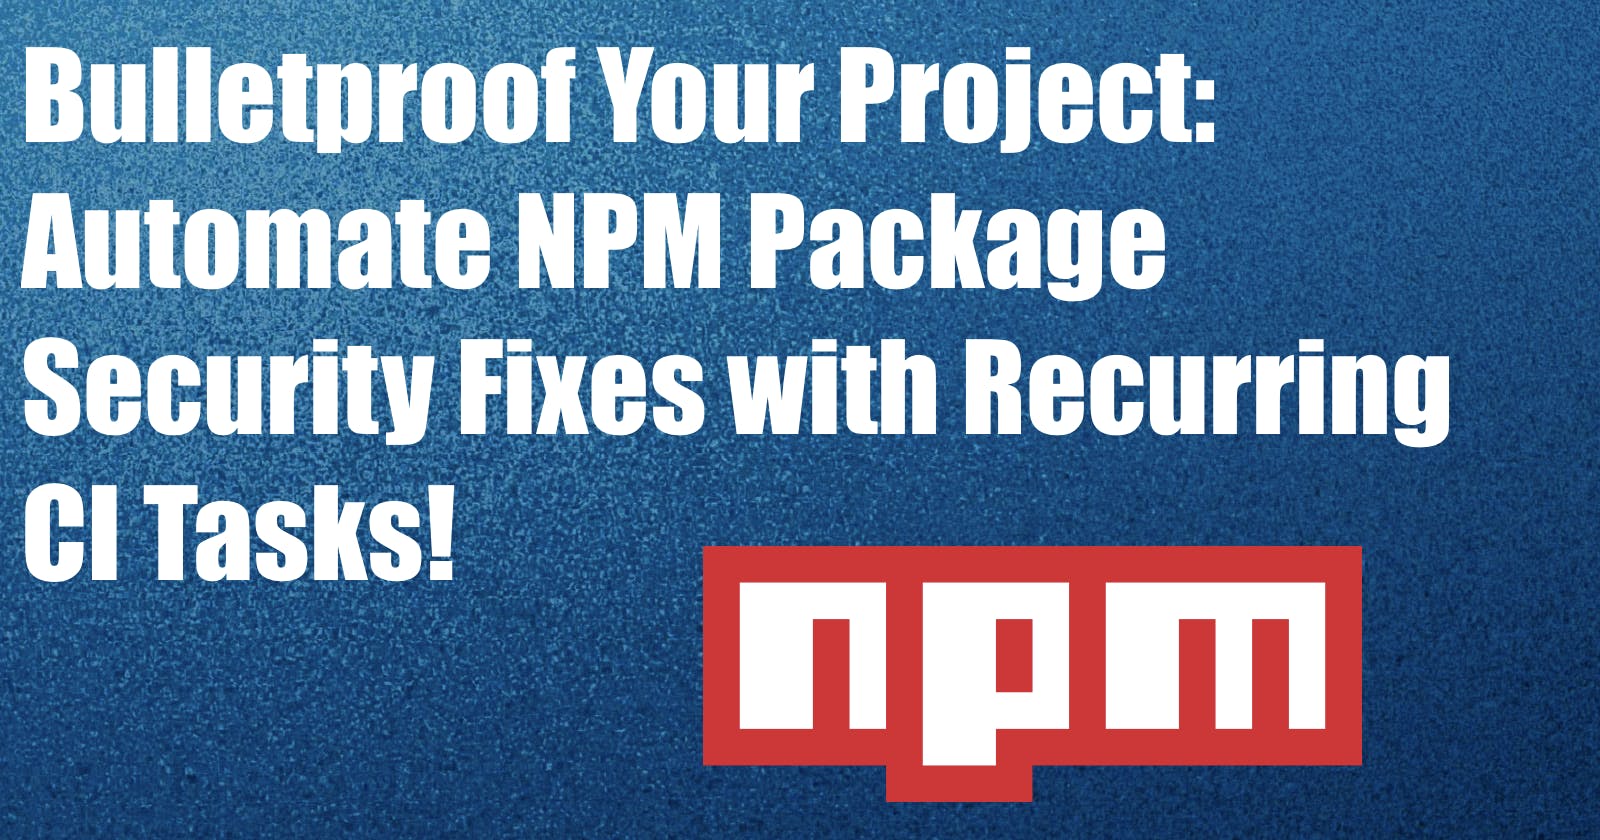 Bulletproof Your Project: Automate NPM Package Security Fixes with Recurring CI Tasks!